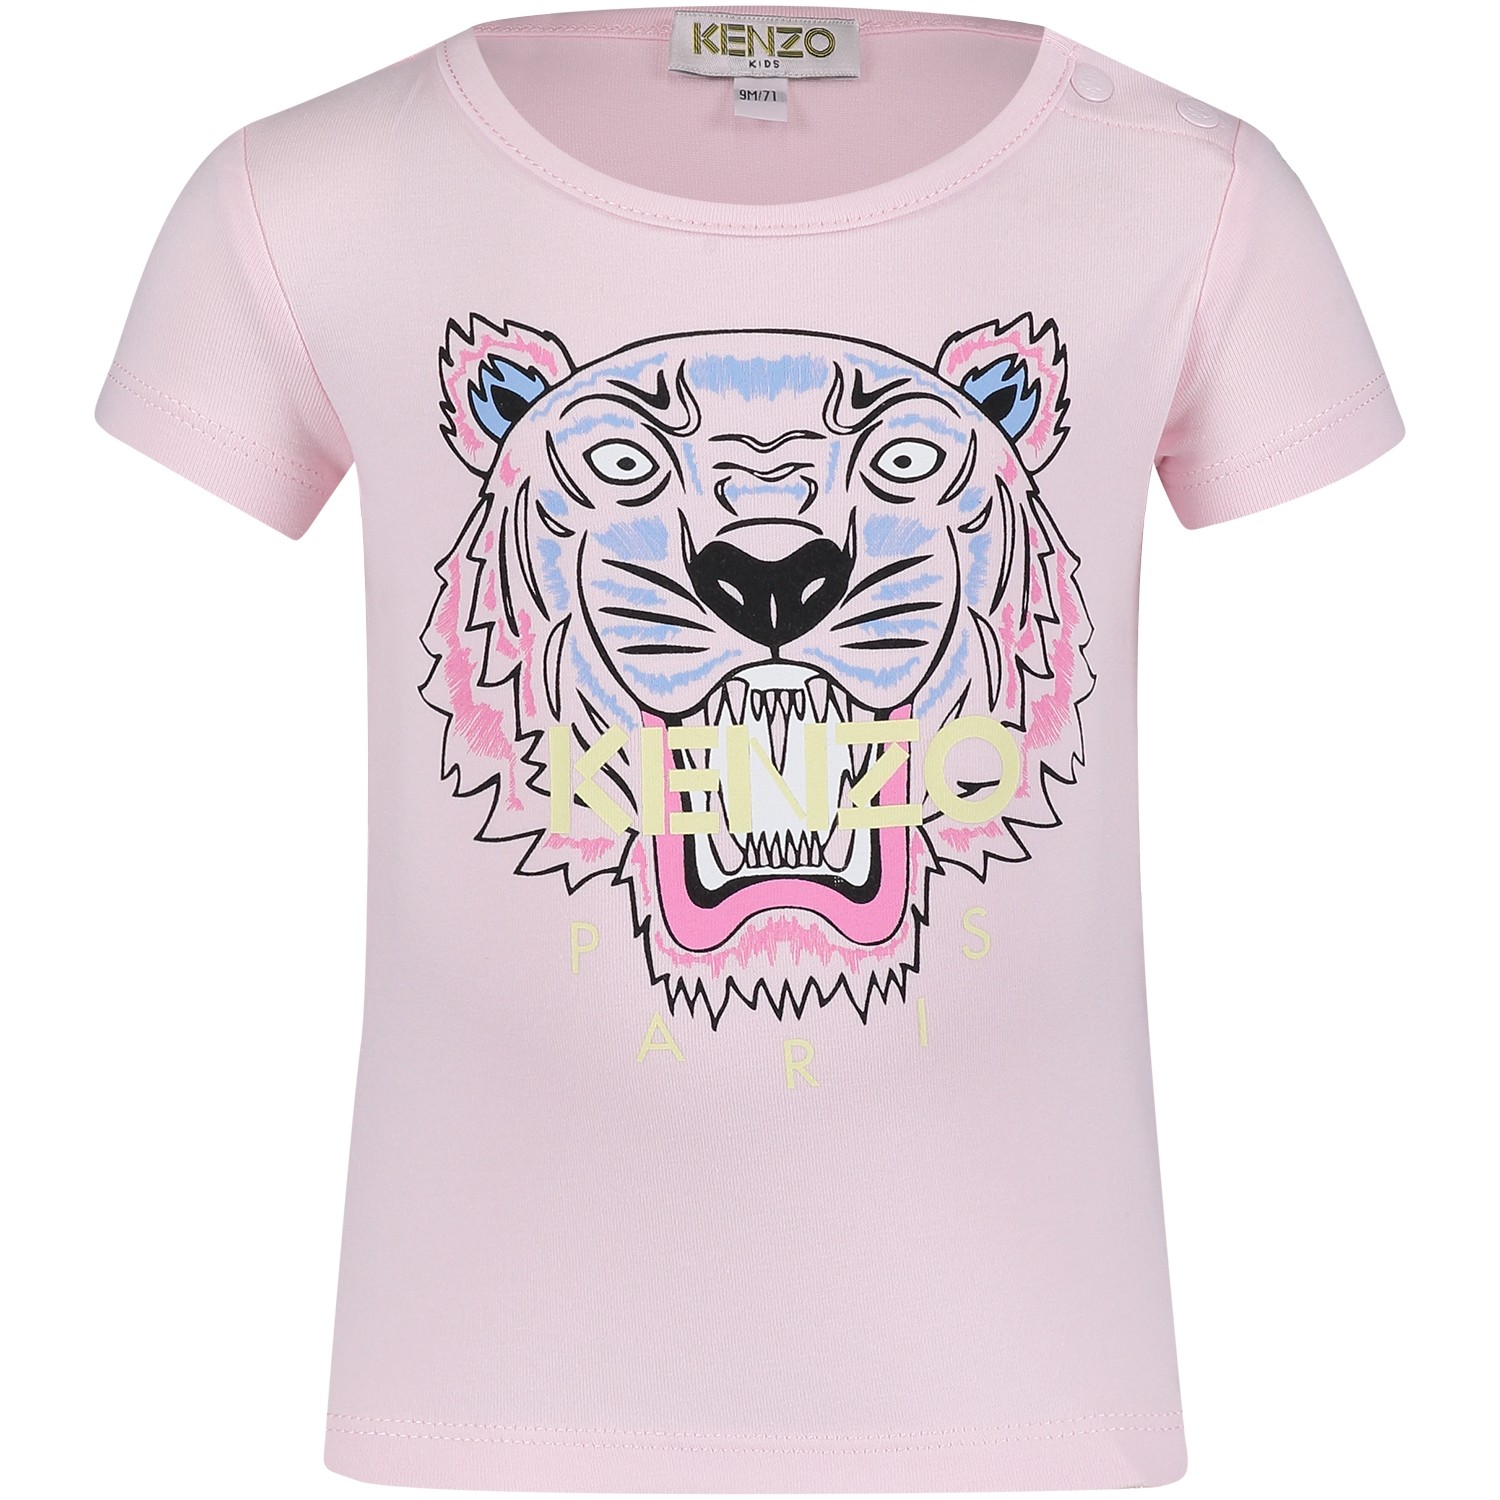 Kenzo Kl10017 Girls Light Pink at Coccinelle